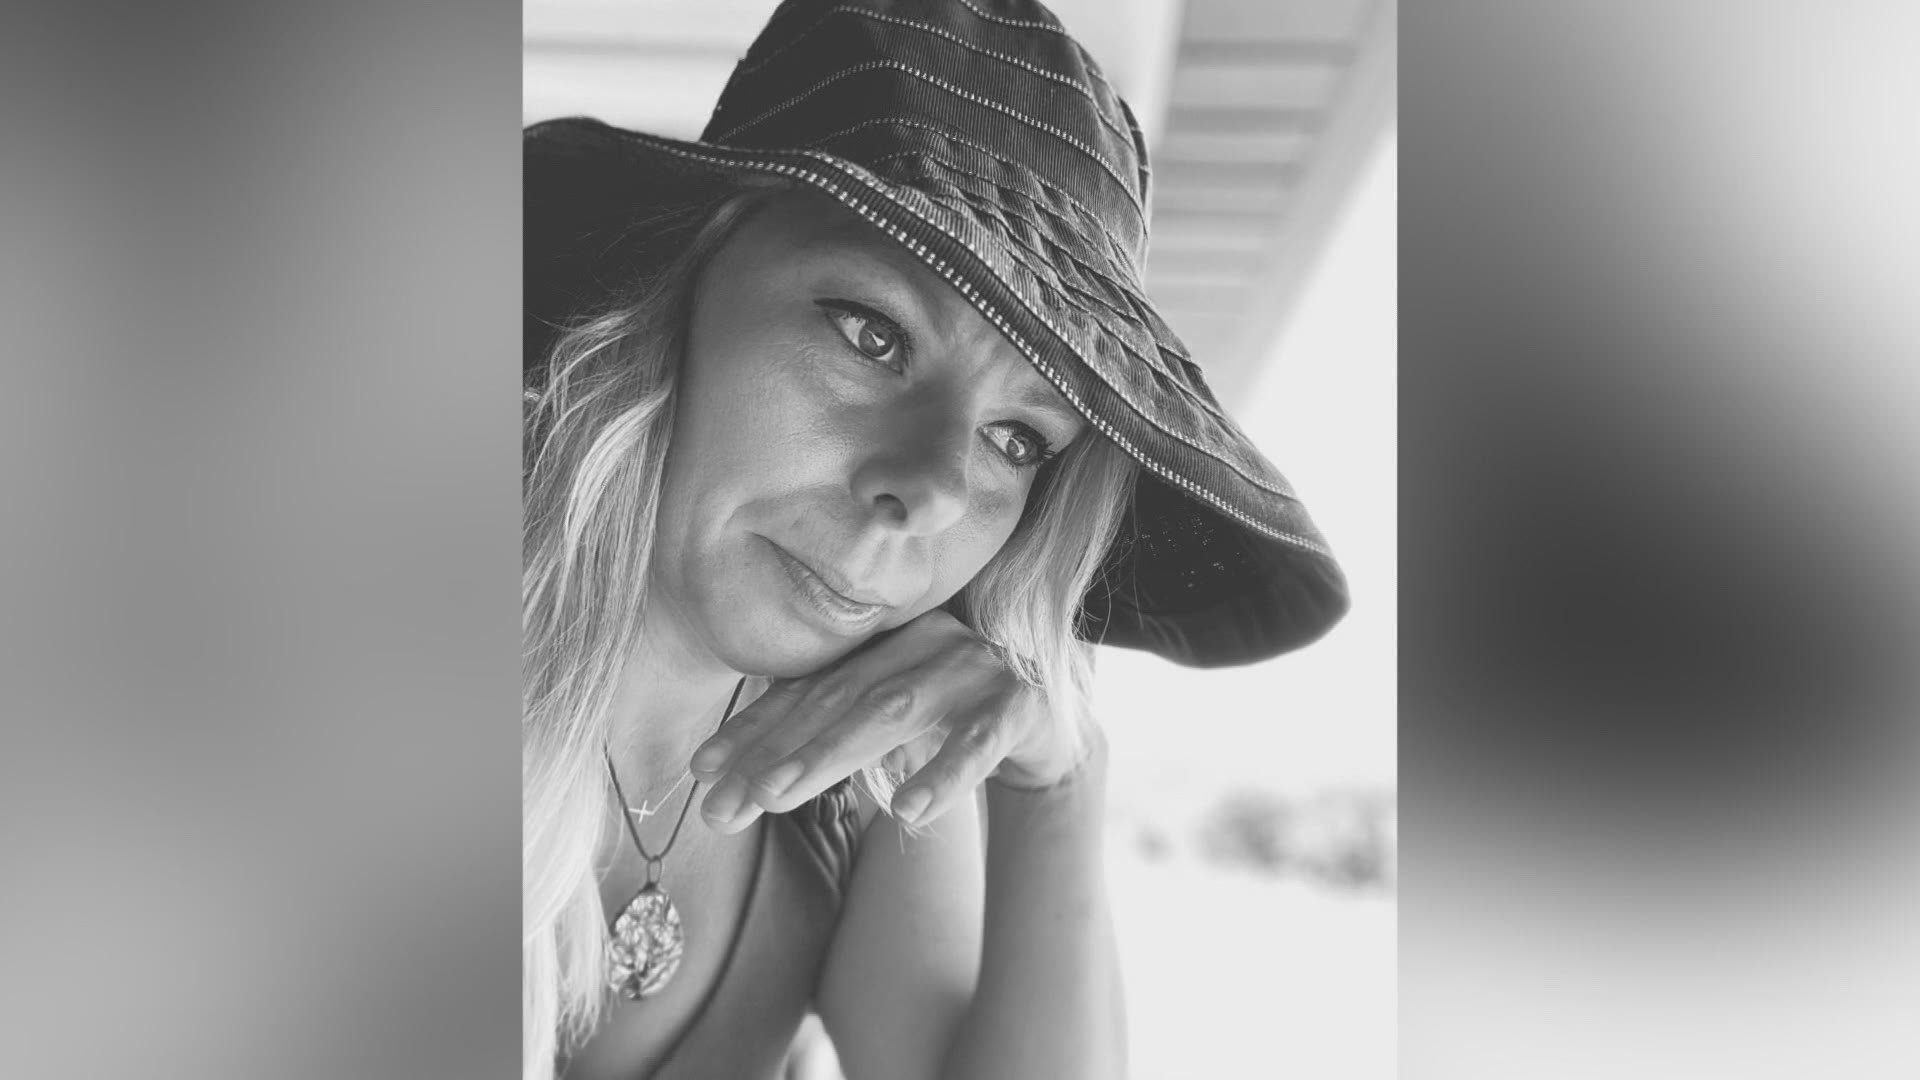 Police have identified the woman as 43 year old Collette Daggett, her children say they don't believe the death was an accident.